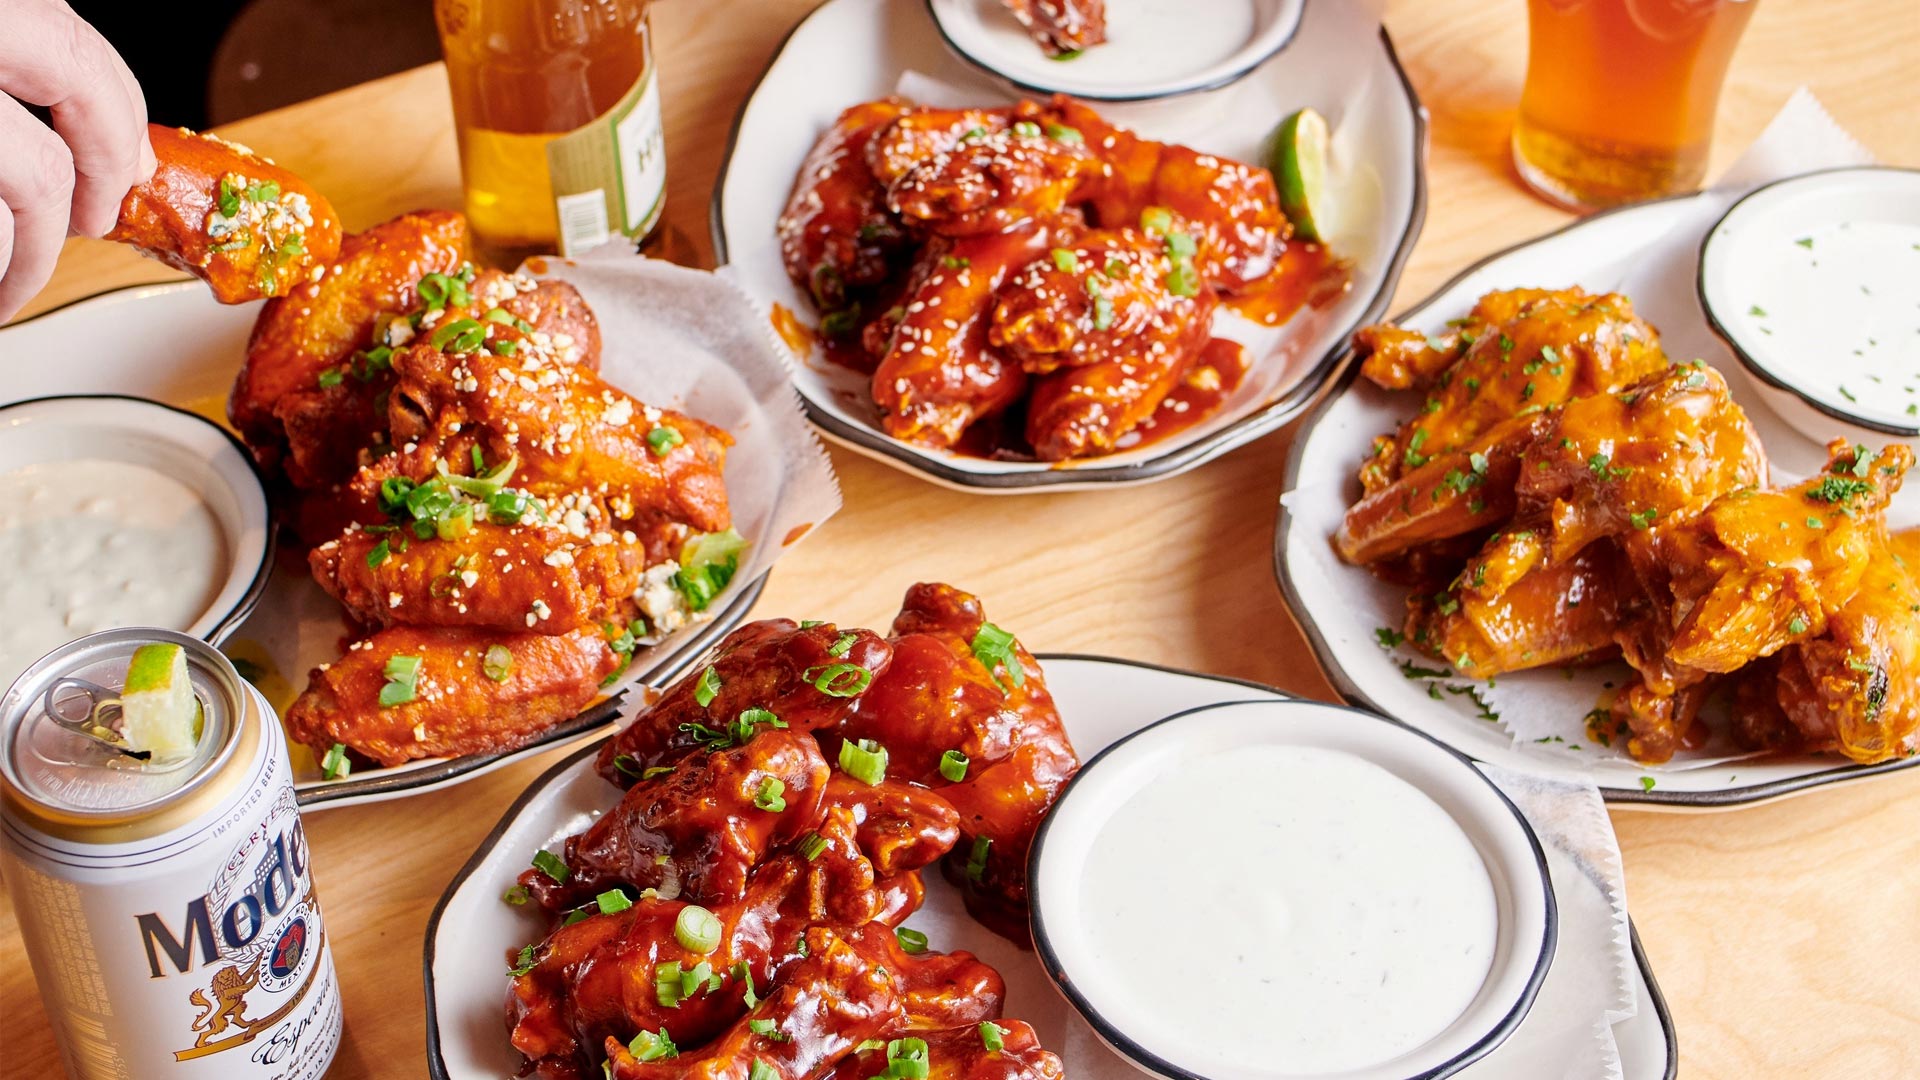 Crispy wings paired with beer at the best casual dining restaurants in Singapore